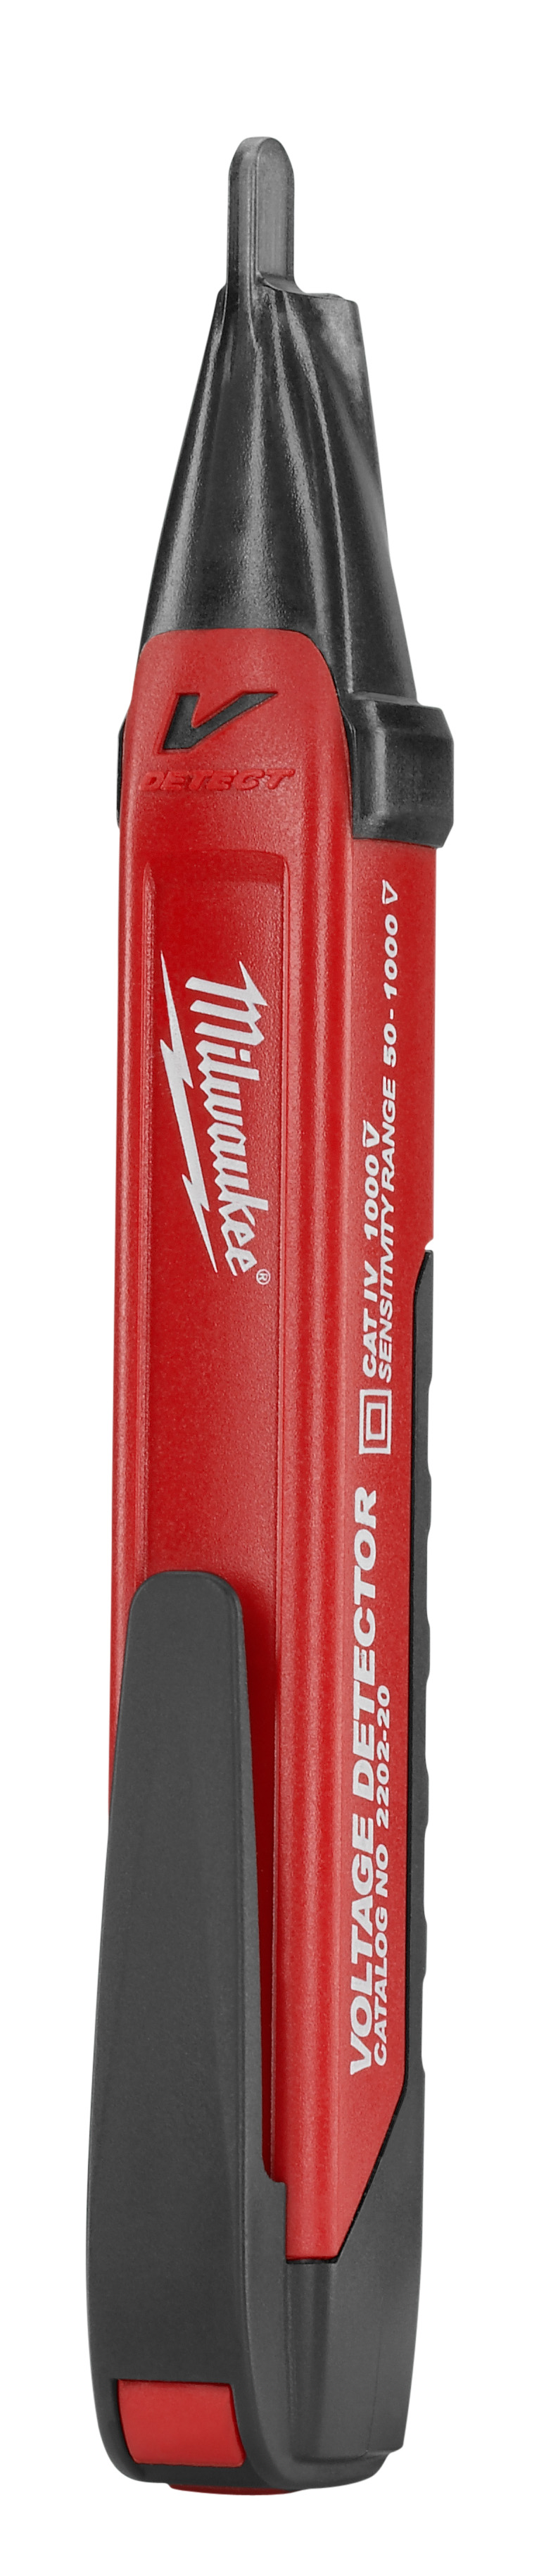 The Milwaukee voltage detector with LED is used for residential, commercial and industrial applications. The 2202-20 can detect between 50 and 1000 V AC and has an industry leading safety rating of cat IV 1000 V. with a built in bright LED work light, the 2202-20 is two tools in one. The durable tip allows for easy checking of power outlets. The 2202-20 is also designed with a green power on indicator light so you know the voltage detector is working properly before use.